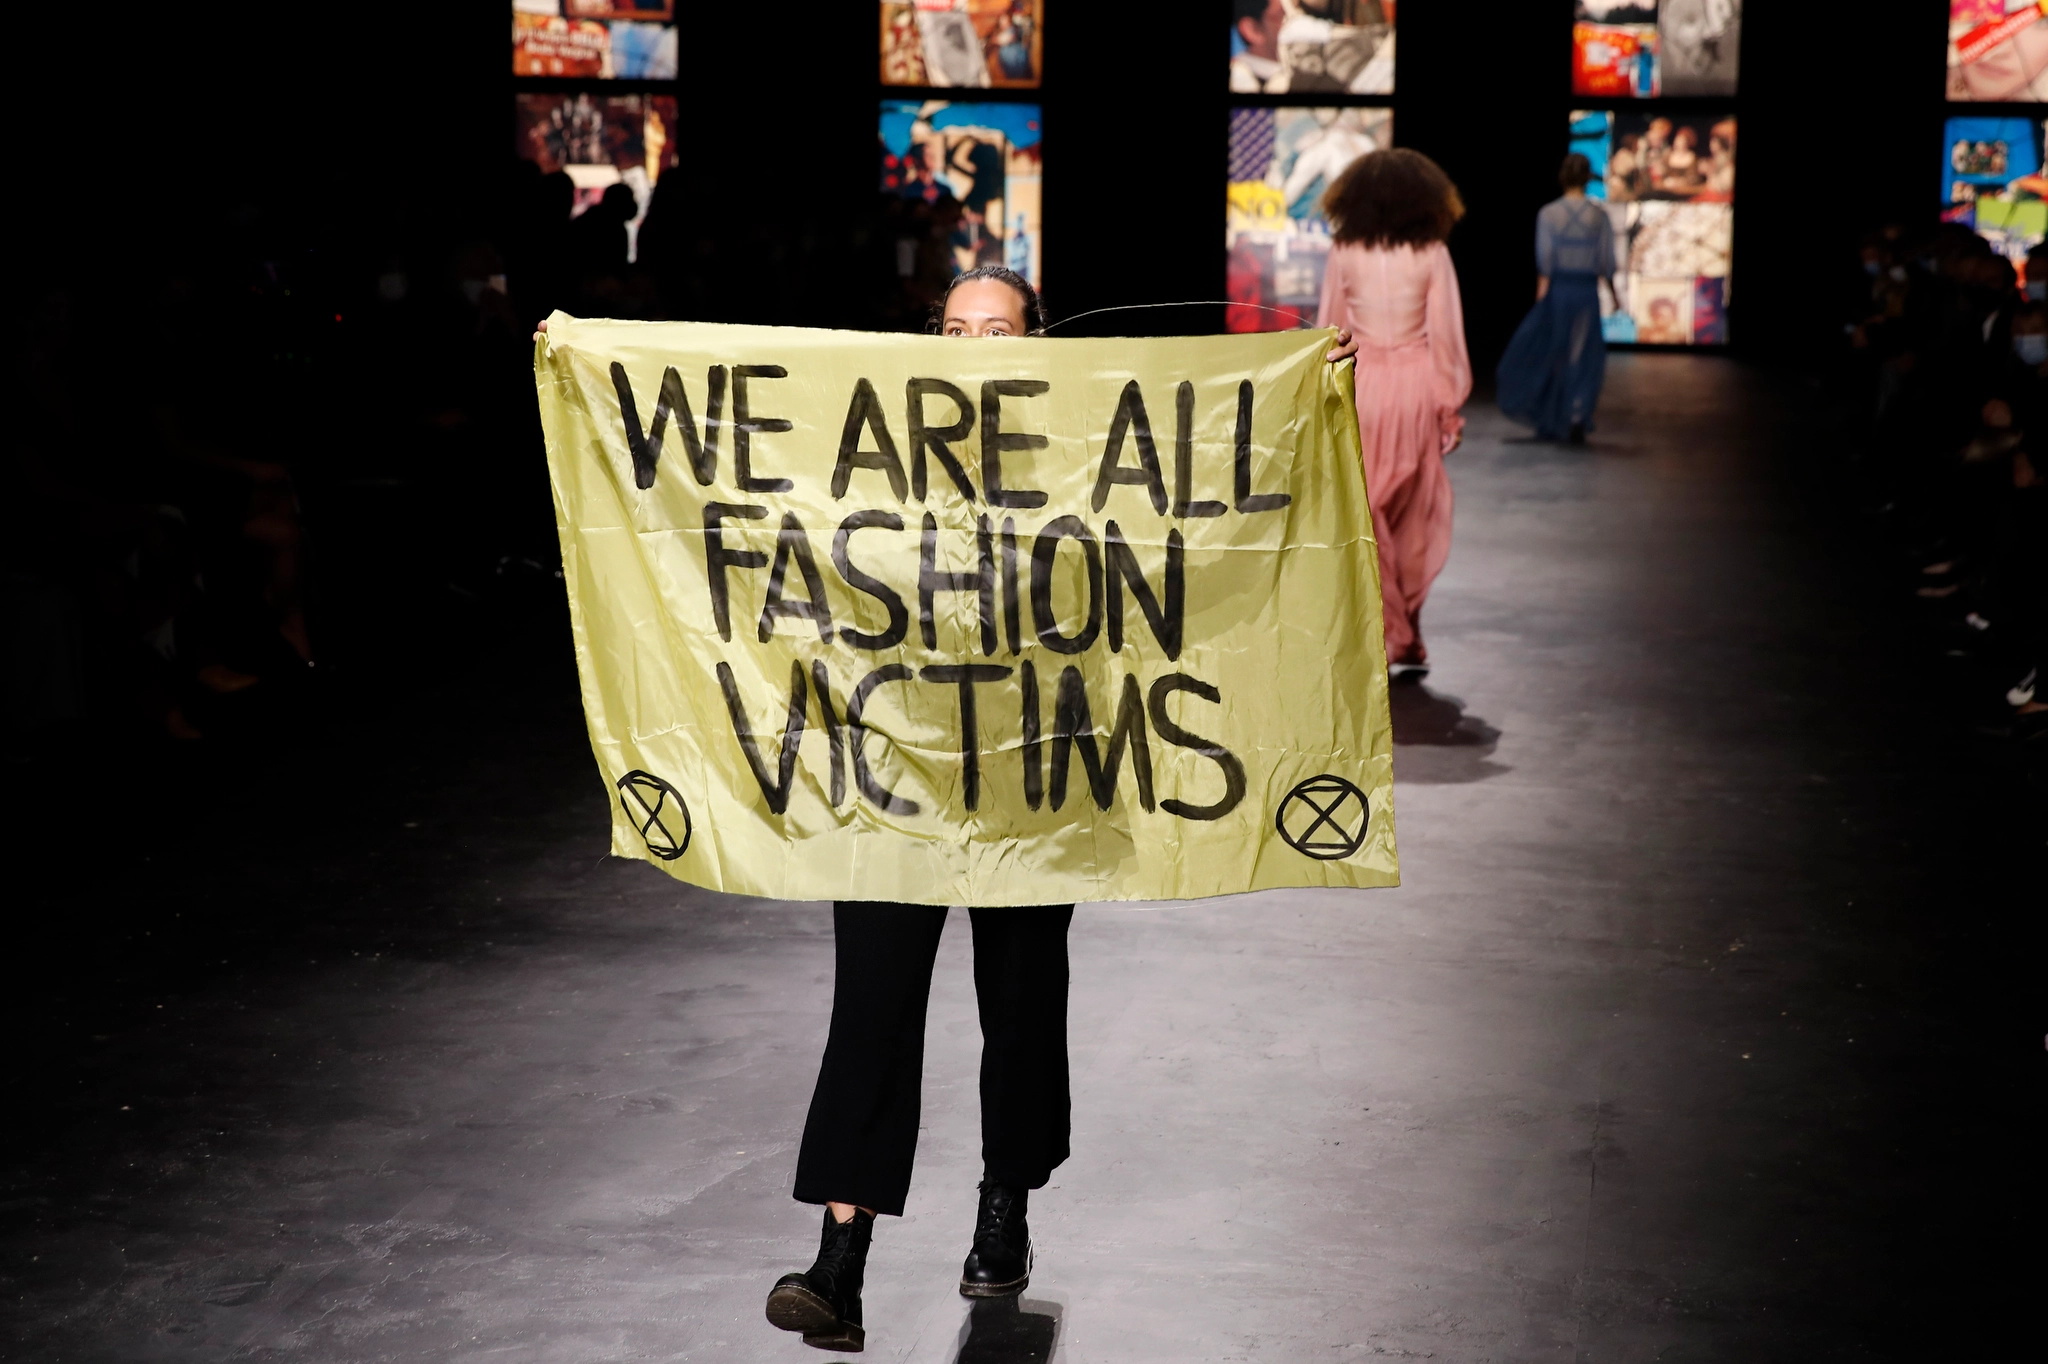 Lampoon, We are all fashion victims. Francois Mori AP Images